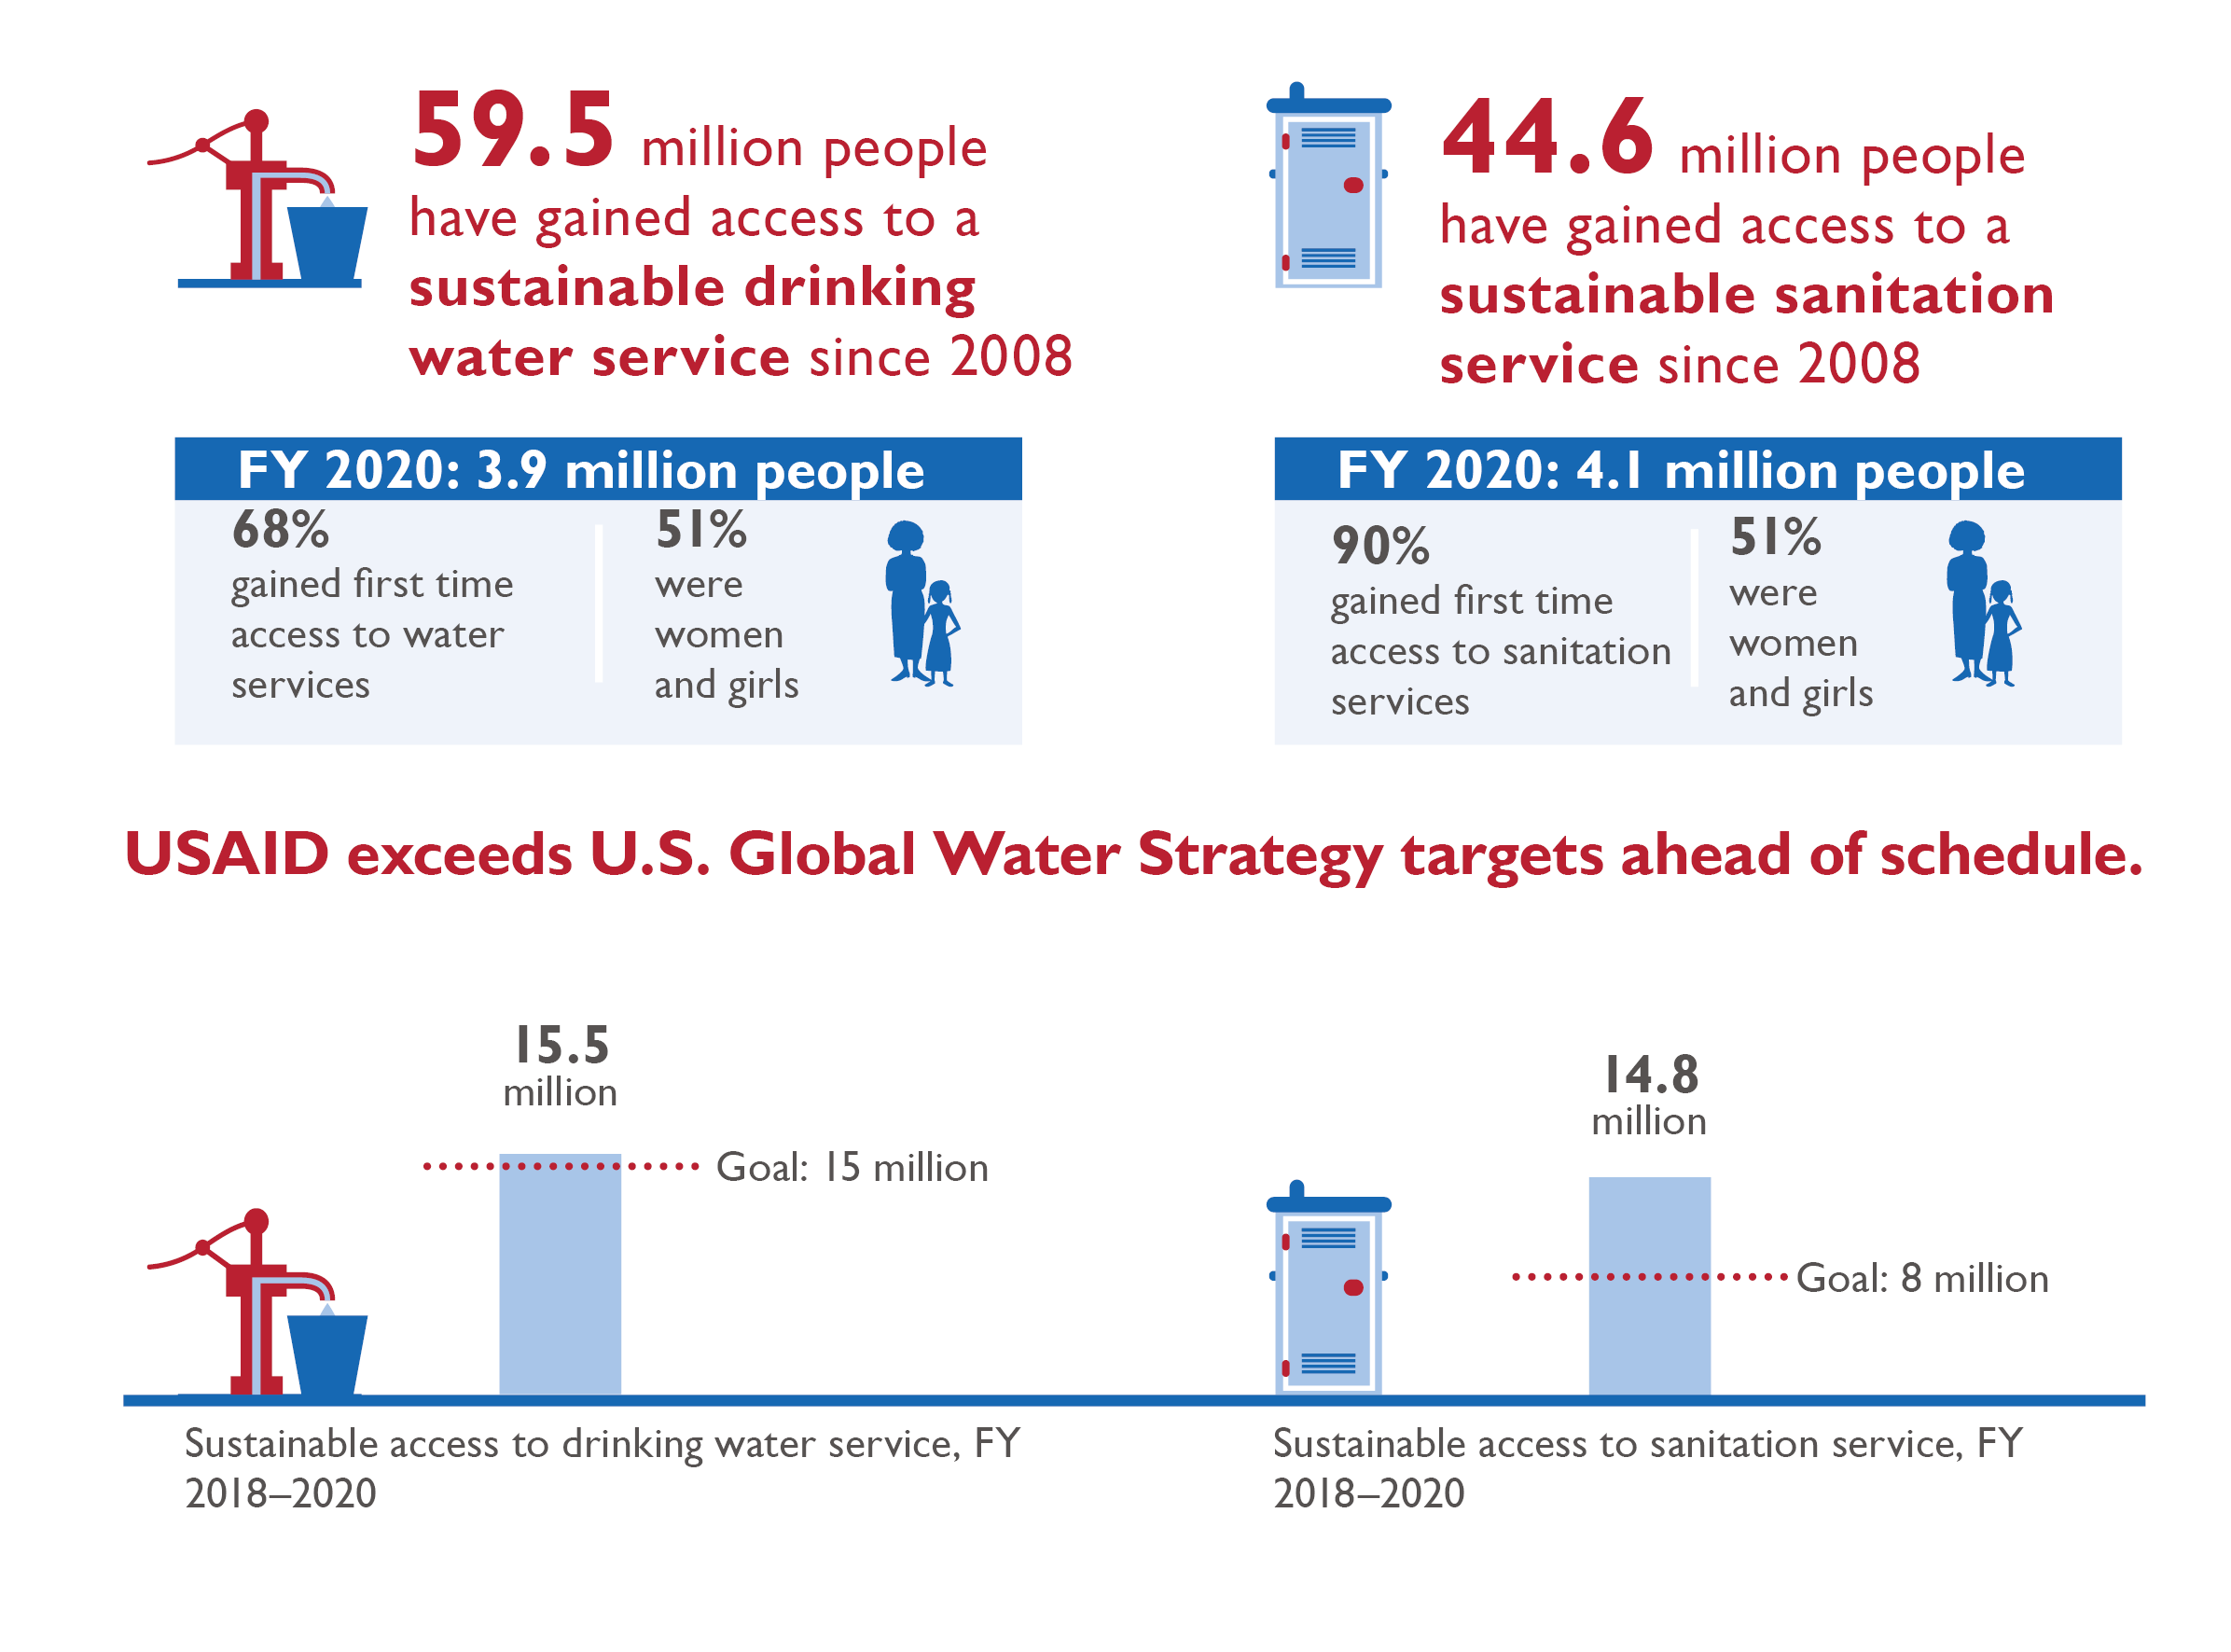 59.5 million people have gained access to a sustainable drinking water service since 2008. 68% gained first time access to water services. 51% were women and girls. 44.6million people have gained access to a sustainable sanitation service since 2008. 90% gained first time access to sanitation services. 51% were women and girls. USAID exceeds US Global water stratedy tagets ahead of schedule